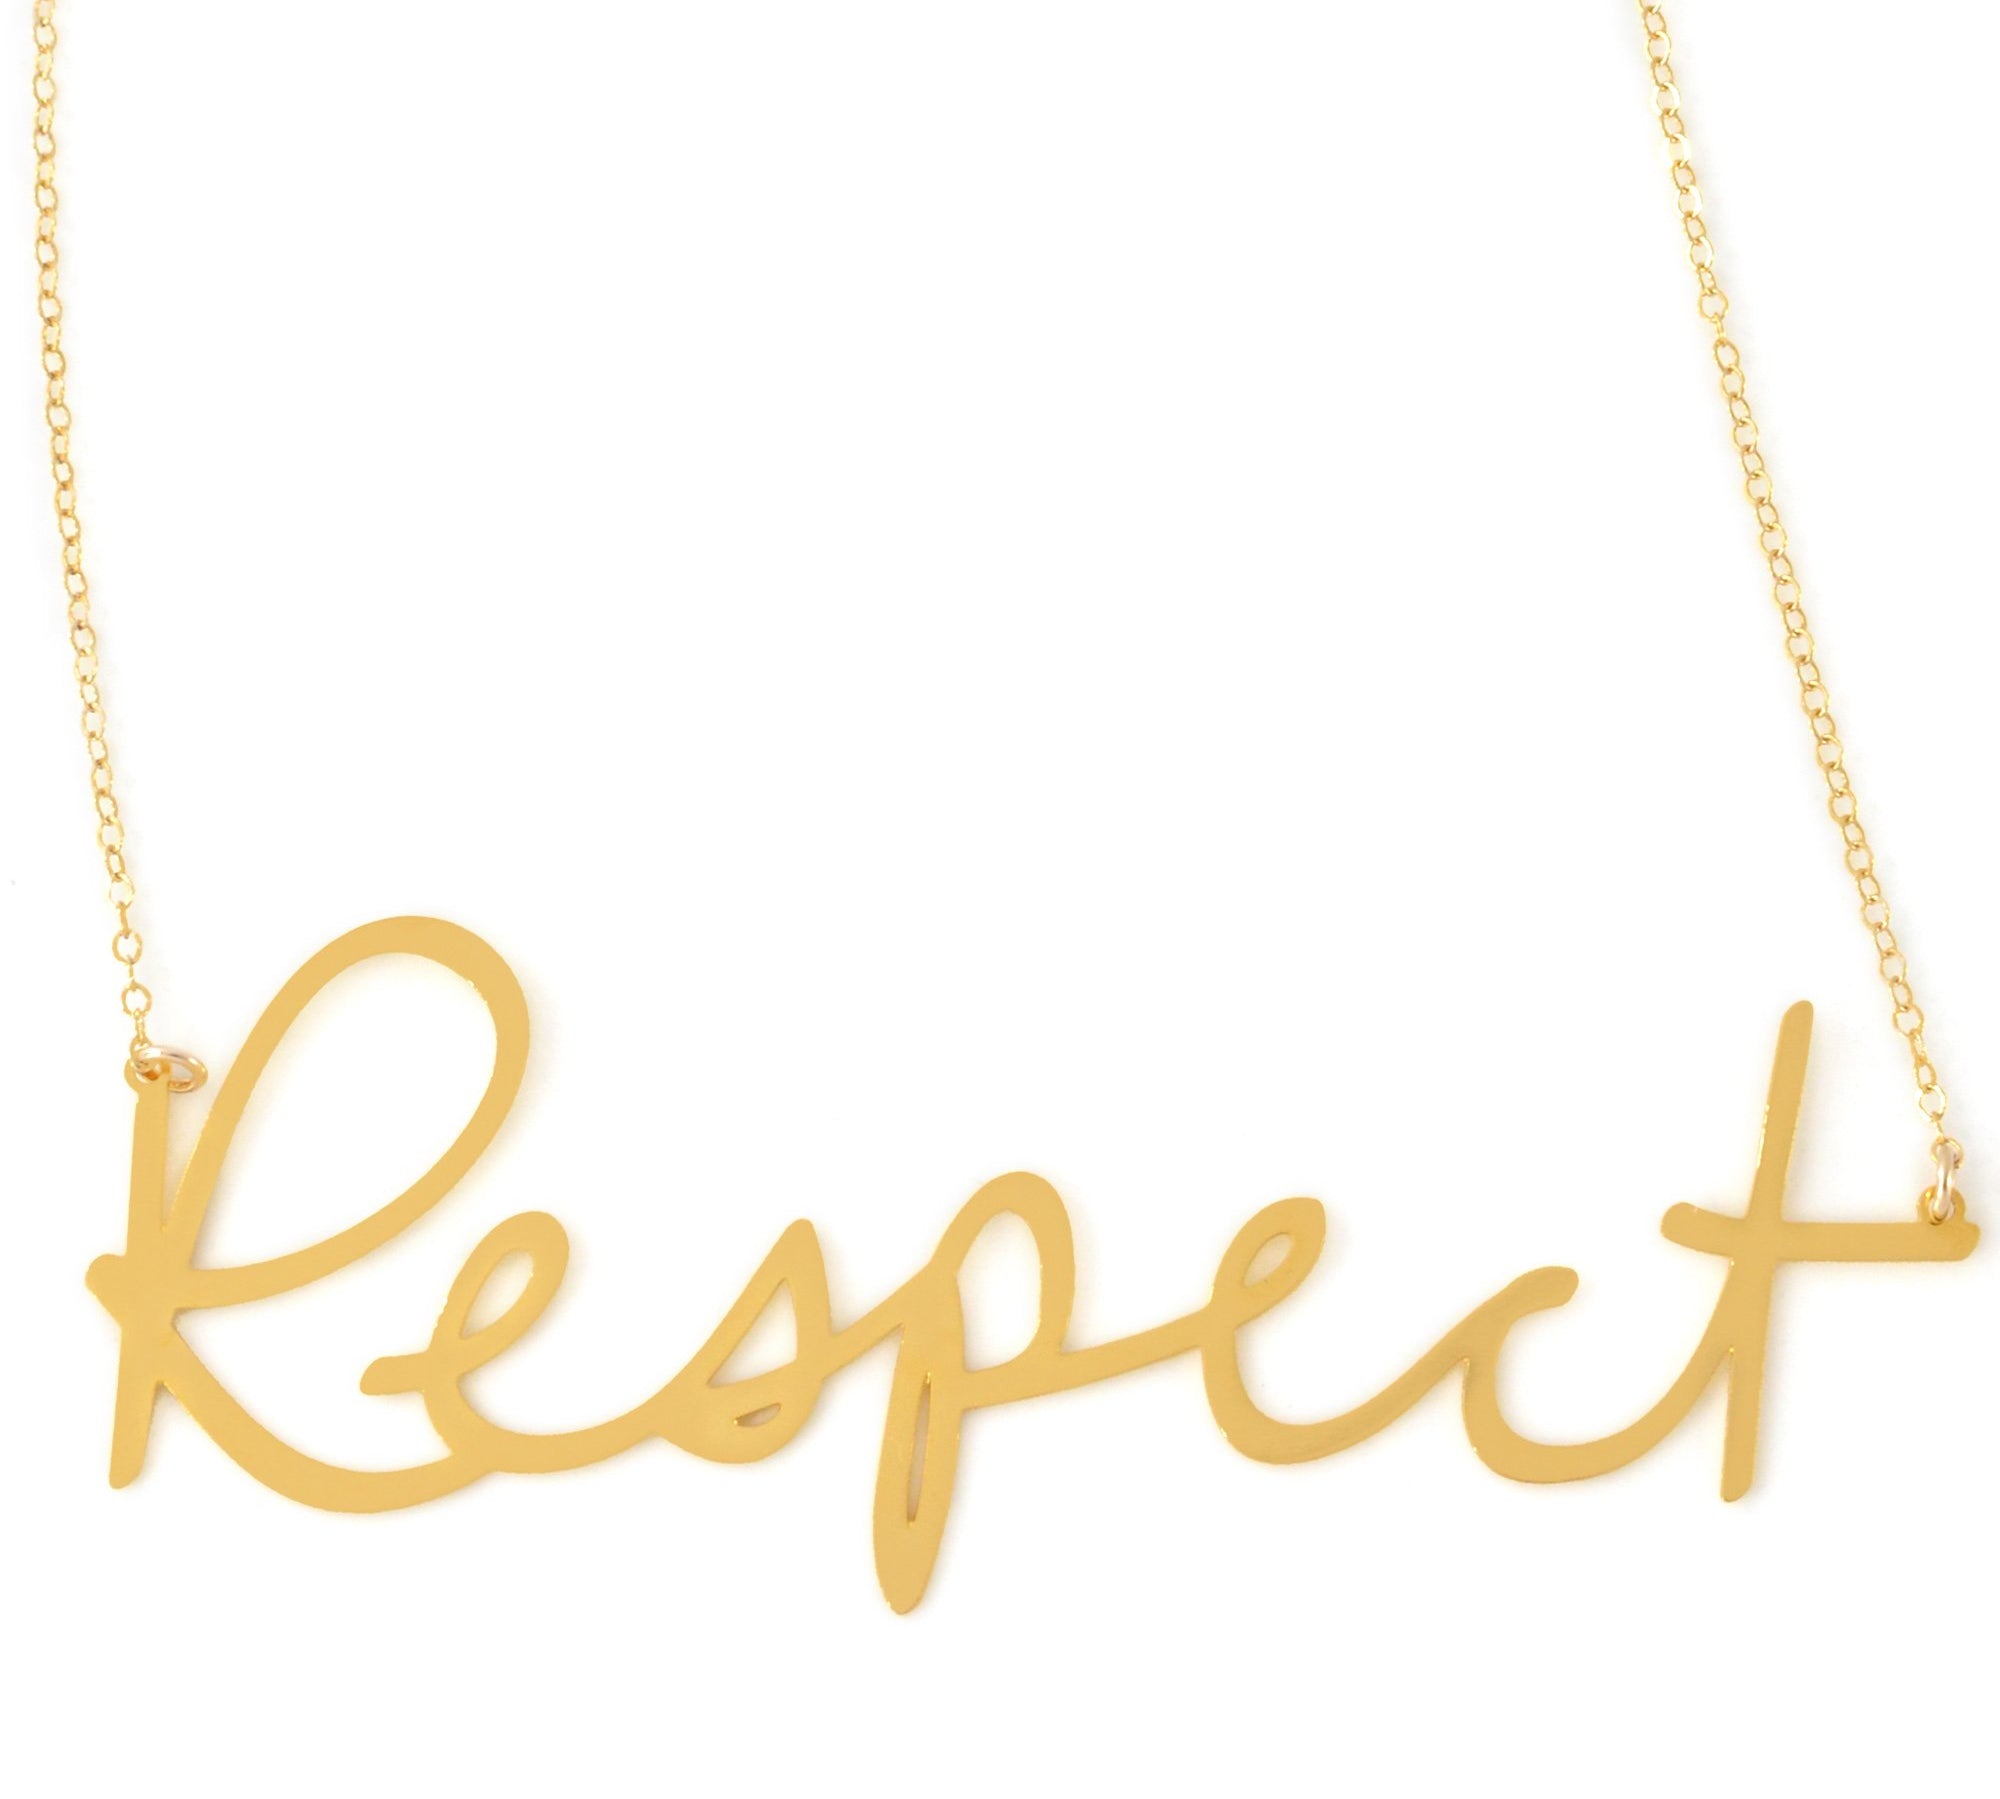 Respect Necklace - High Quality, Affordable, Hand Written, Empowering, Self Love, Mantra Word Necklace - Available in Gold and Silver - Small and Large Sizes - Made in USA - Brevity Jewelry